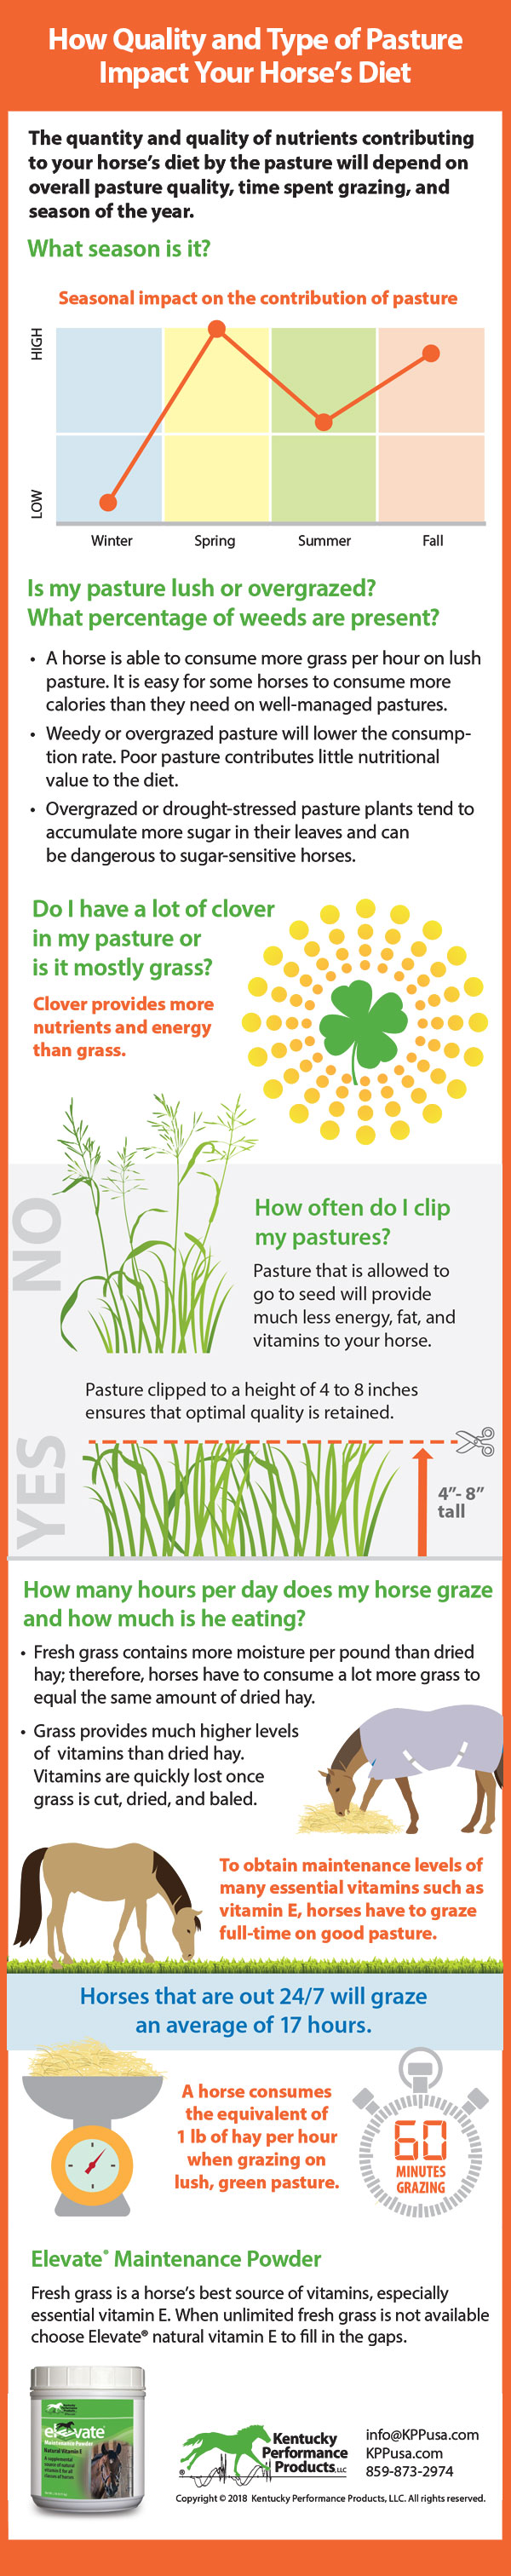 How-Quality-and-Type-of-Pasture-Impact-Your-Horses-Diet-18-164